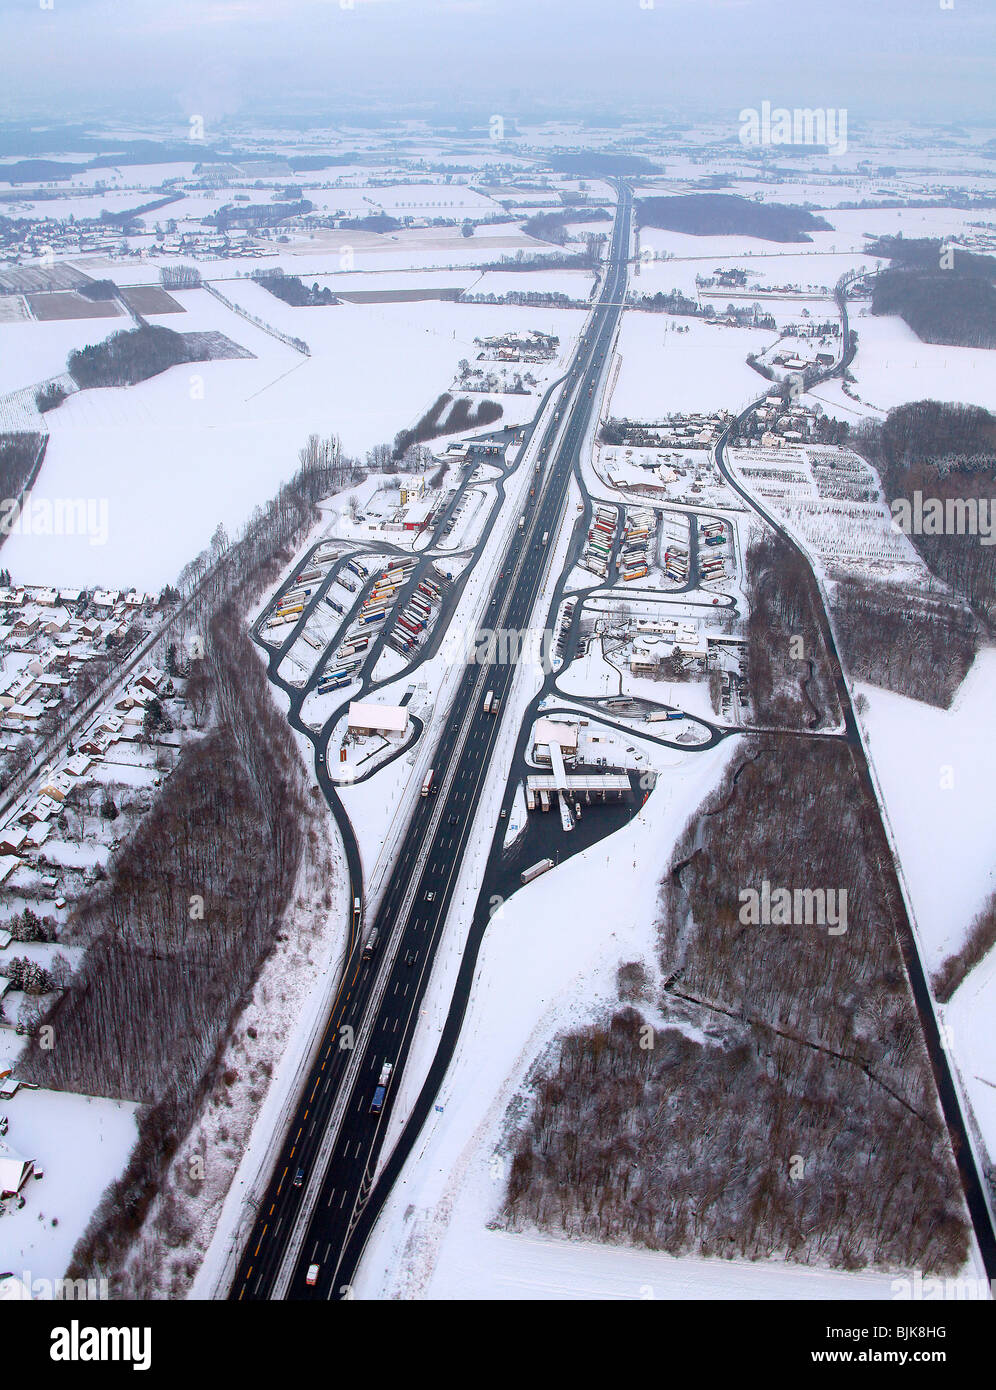 Aerial photo, Rhynern, A2 Autobahn, highway petrol station and rest stop, snow-covered, Hamm, Ruhr area, North Rhine-Westphalia Stock Photo